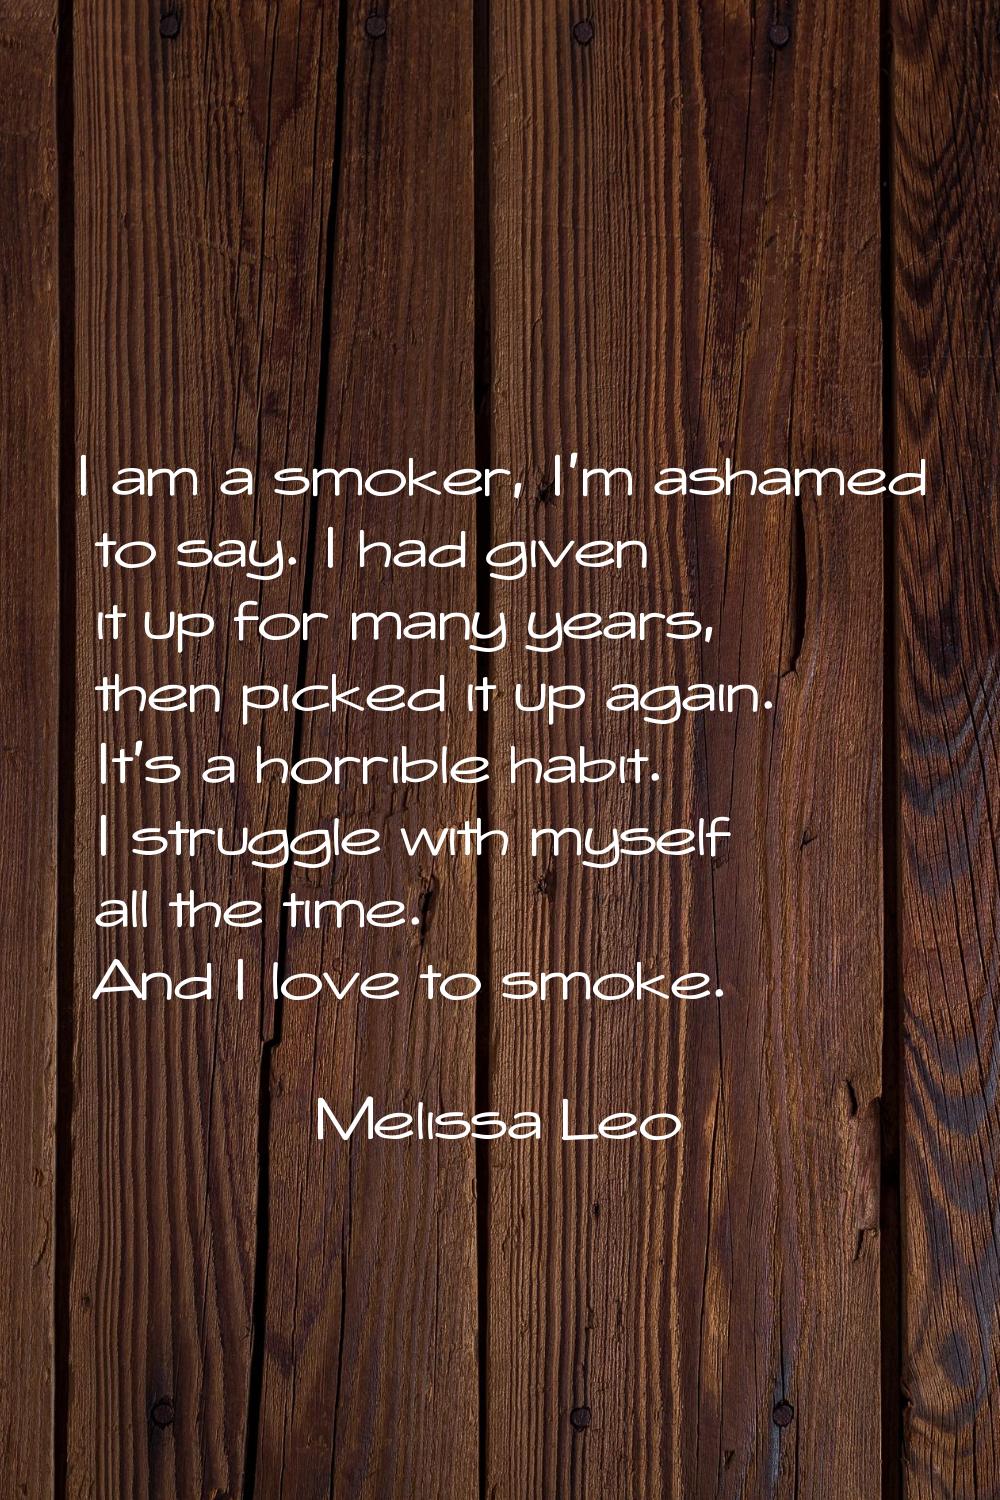 I am a smoker, I'm ashamed to say. I had given it up for many years, then picked it up again. It's 